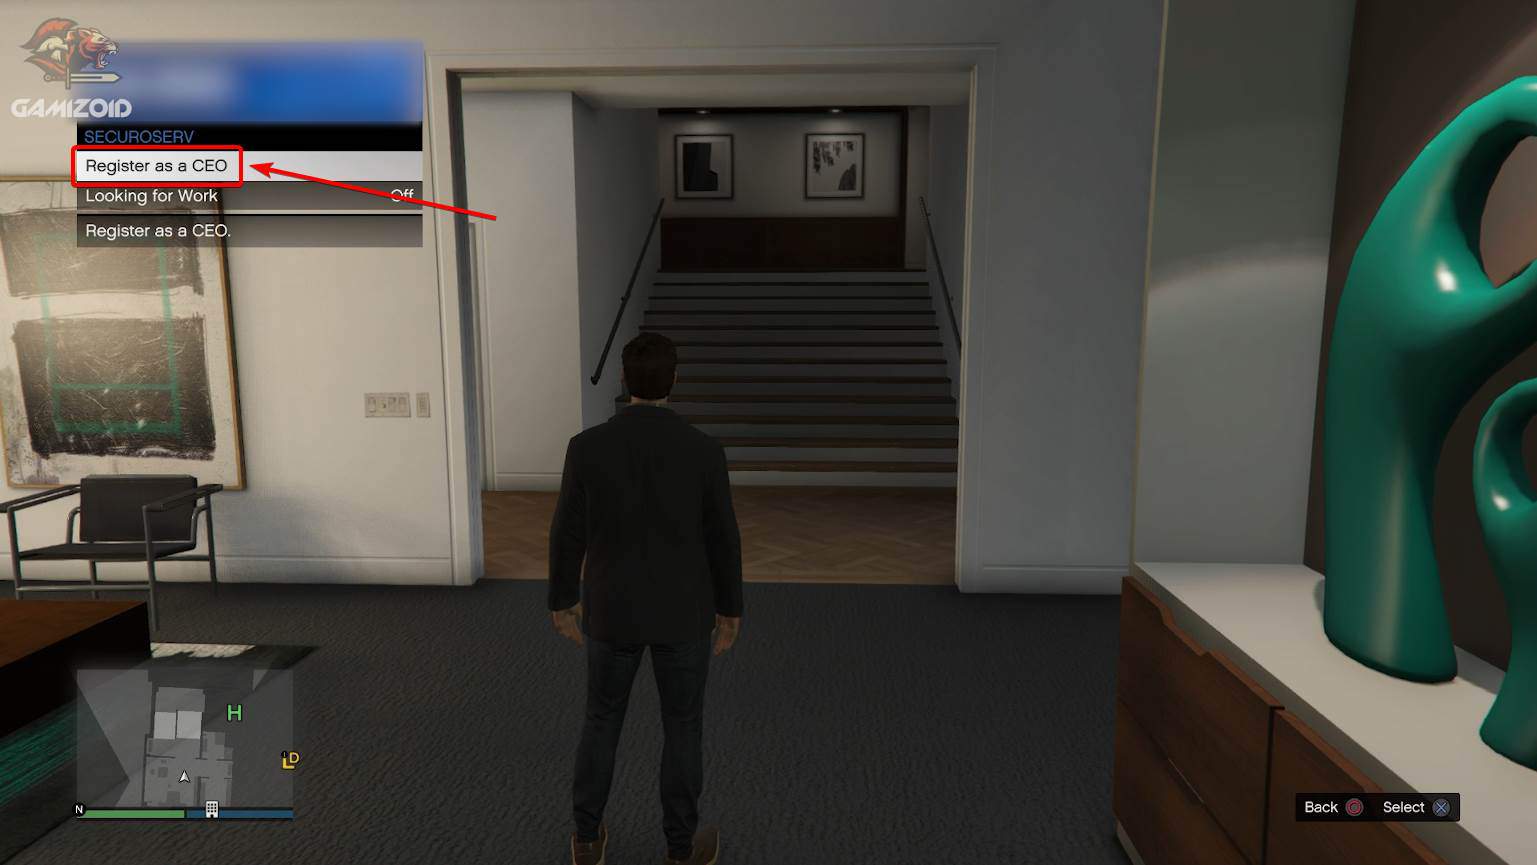 How to register as a CEO in GTA V